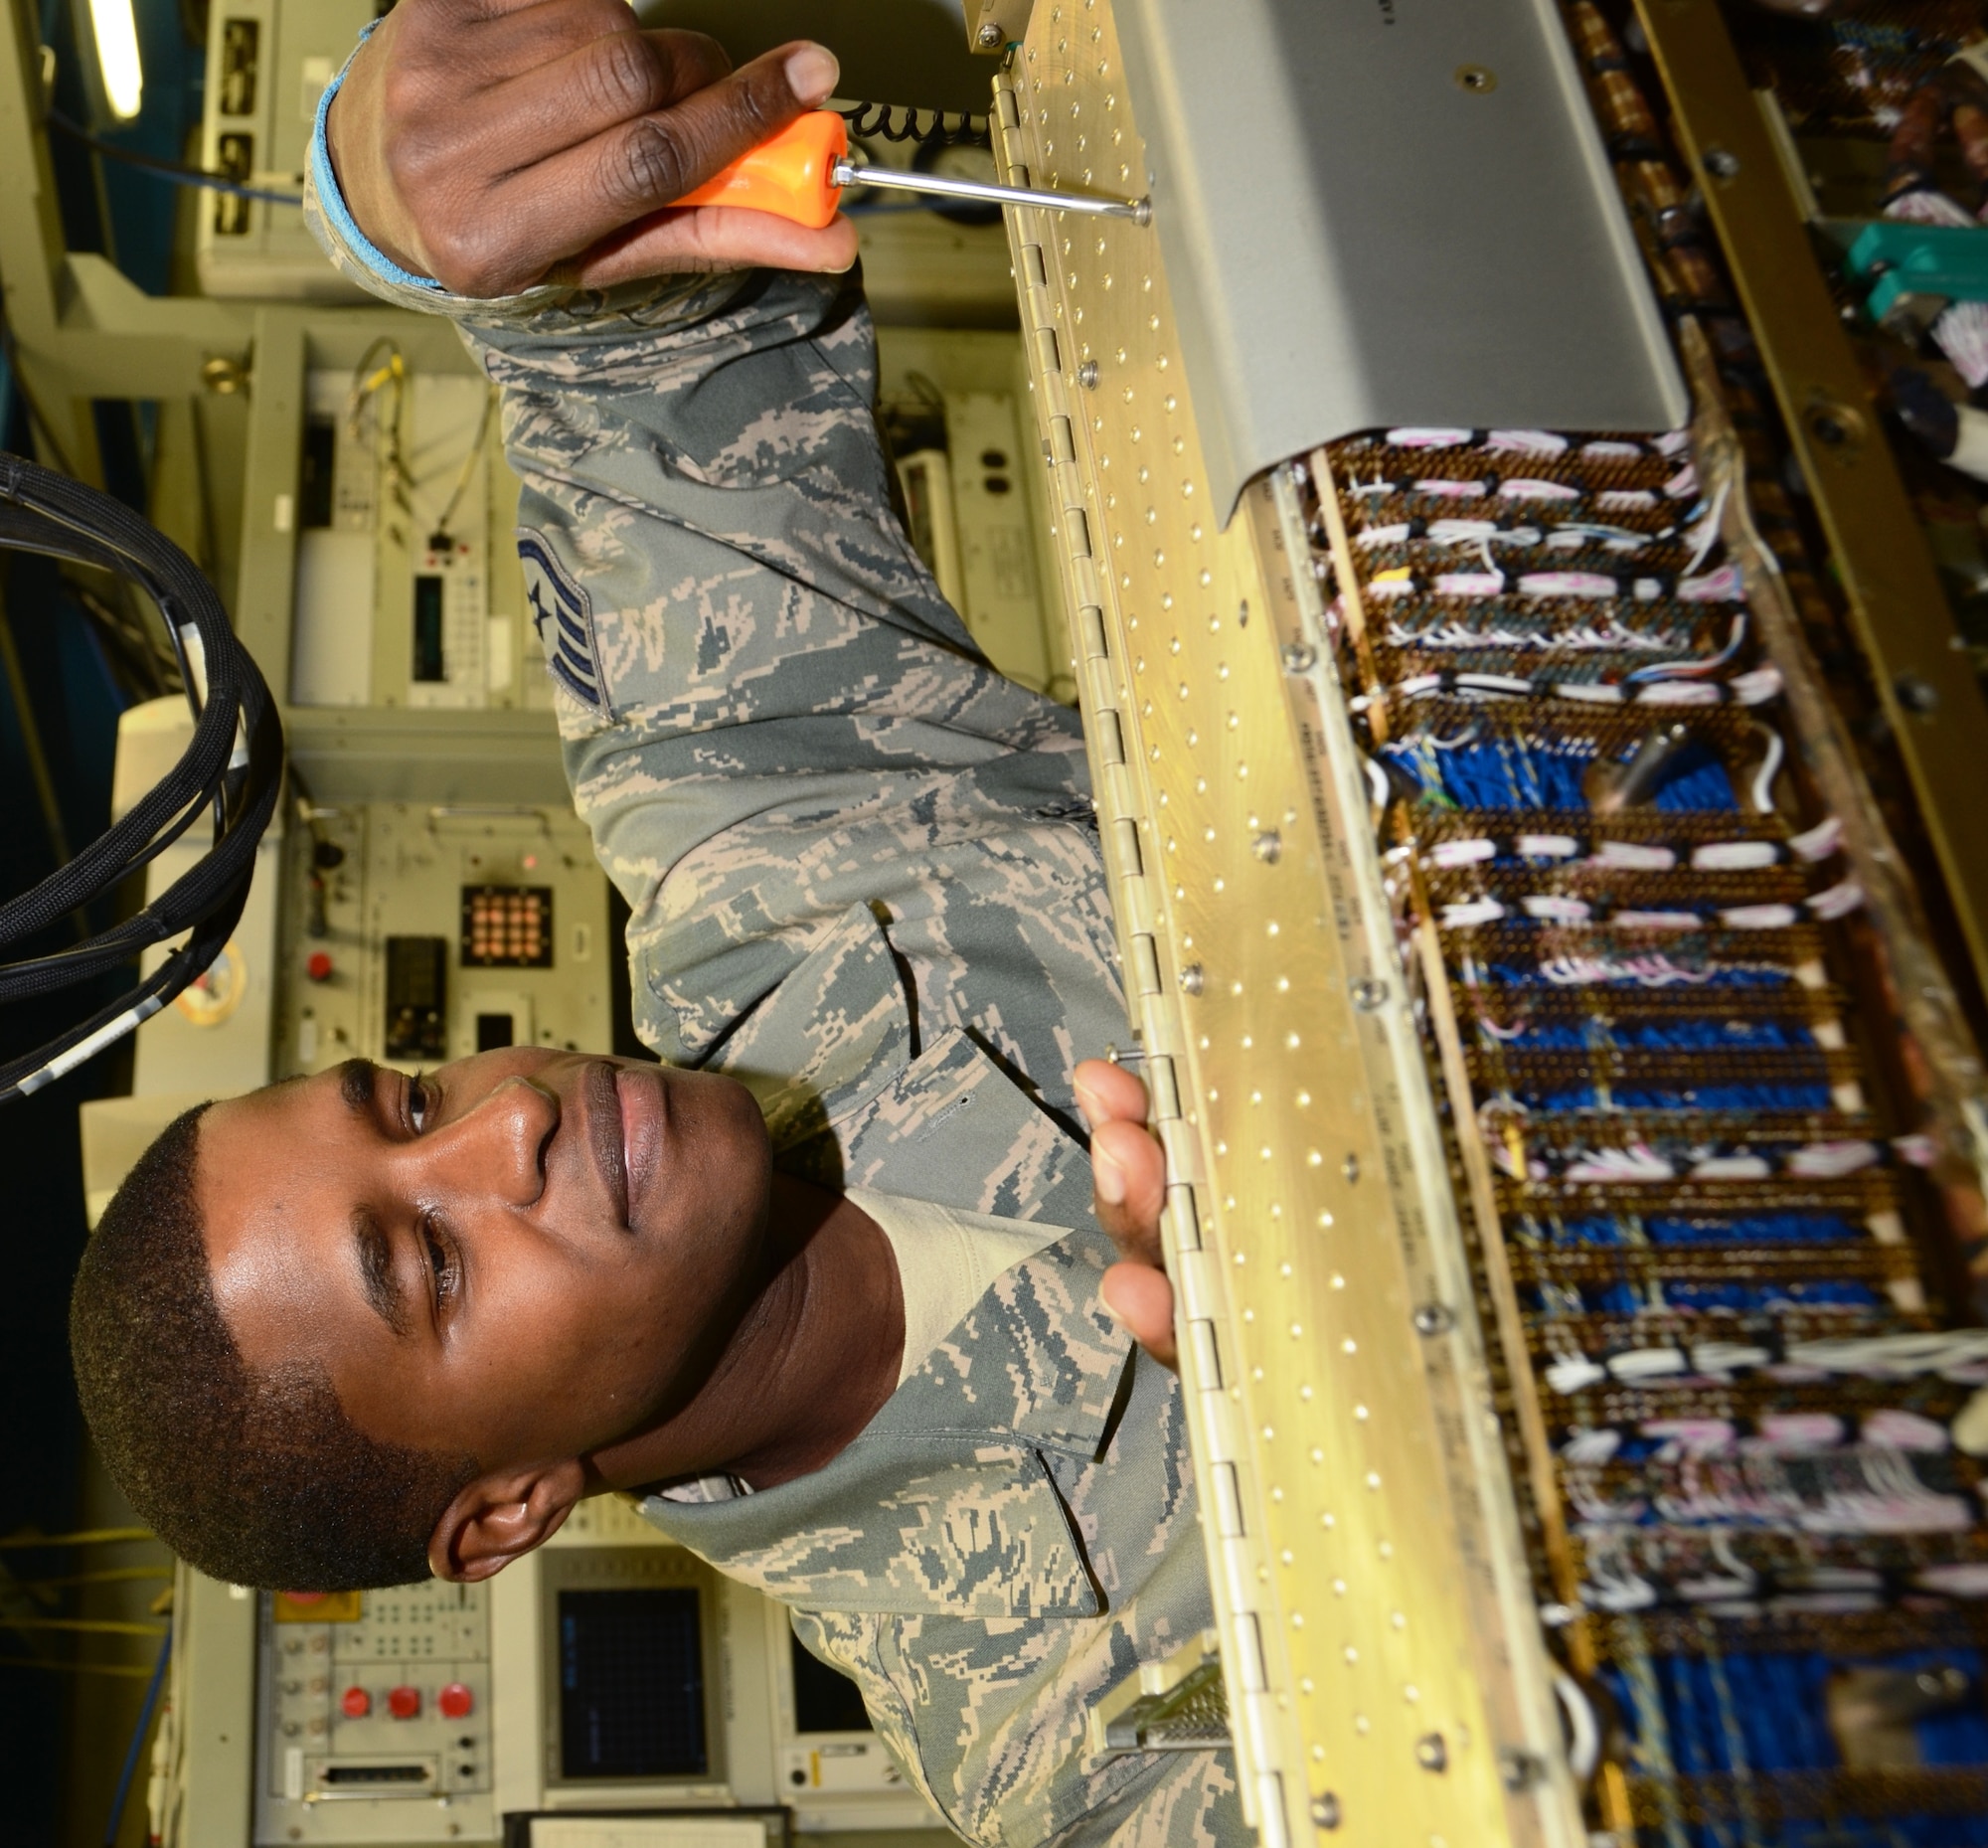 Staff Sgt. Ousseynou S. Sonko, an avionics sensors and electronic warfare systems mechanic in the 175th Maintenance Squadron, disassembles an electronic countermeasures pod. (National Guard photo by Master Sgt. Ed Bard)